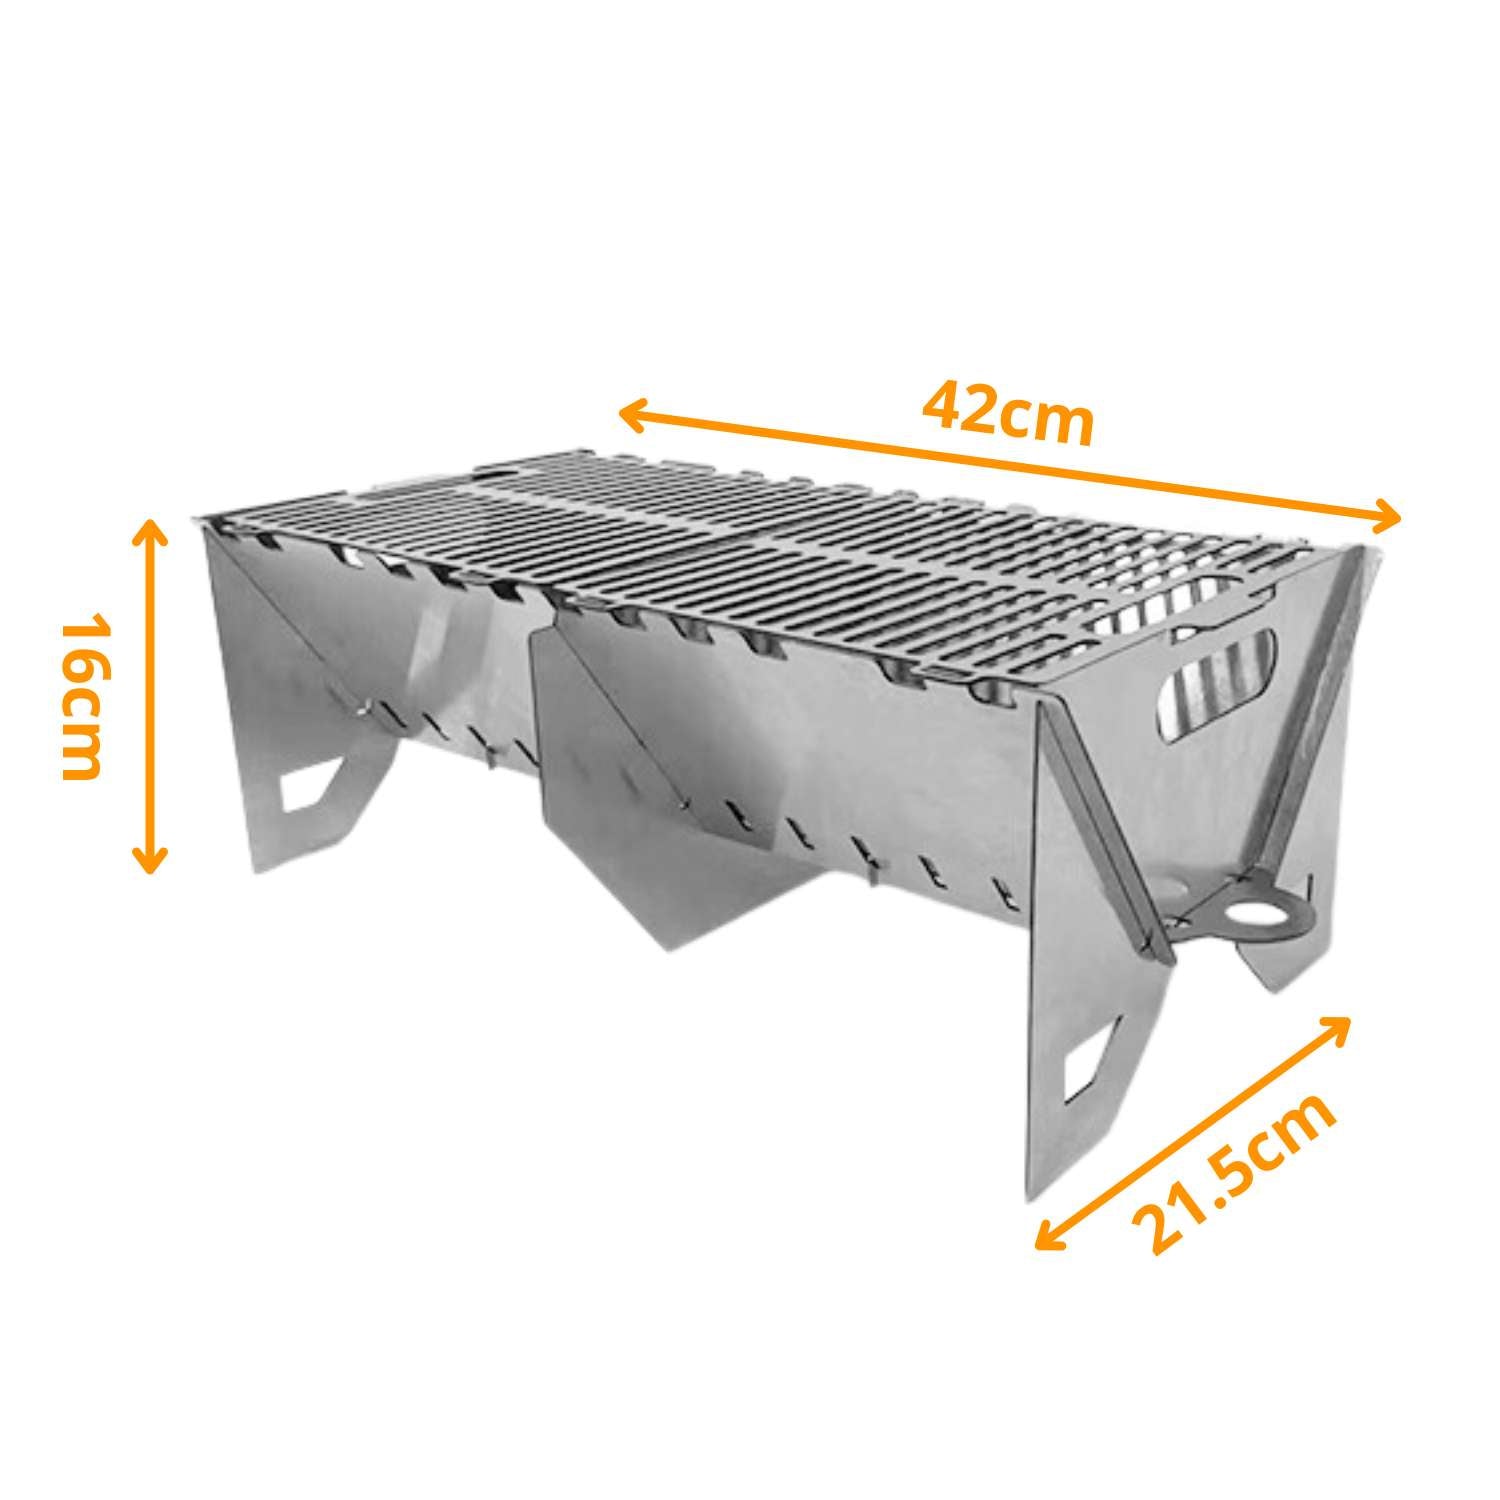 Meat King Premium Grill with Laser Cut Design for BBQ from MeatKing.hk4